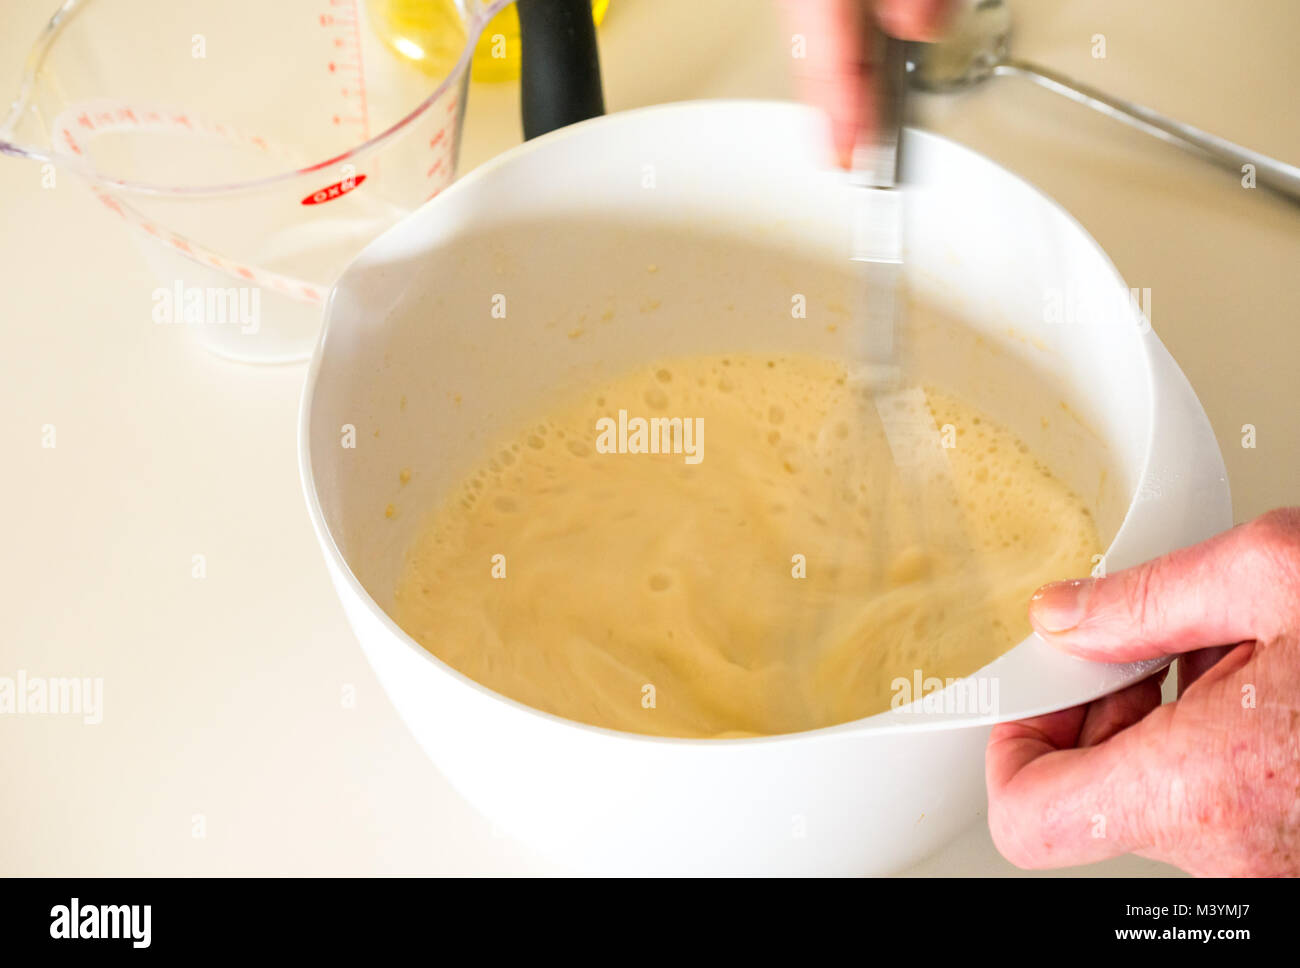 Man beating mixture with whisk to make pancake batter for Shrove Tuesday with flour, milk, eggs, and oil in a home kitchen Stock Photo